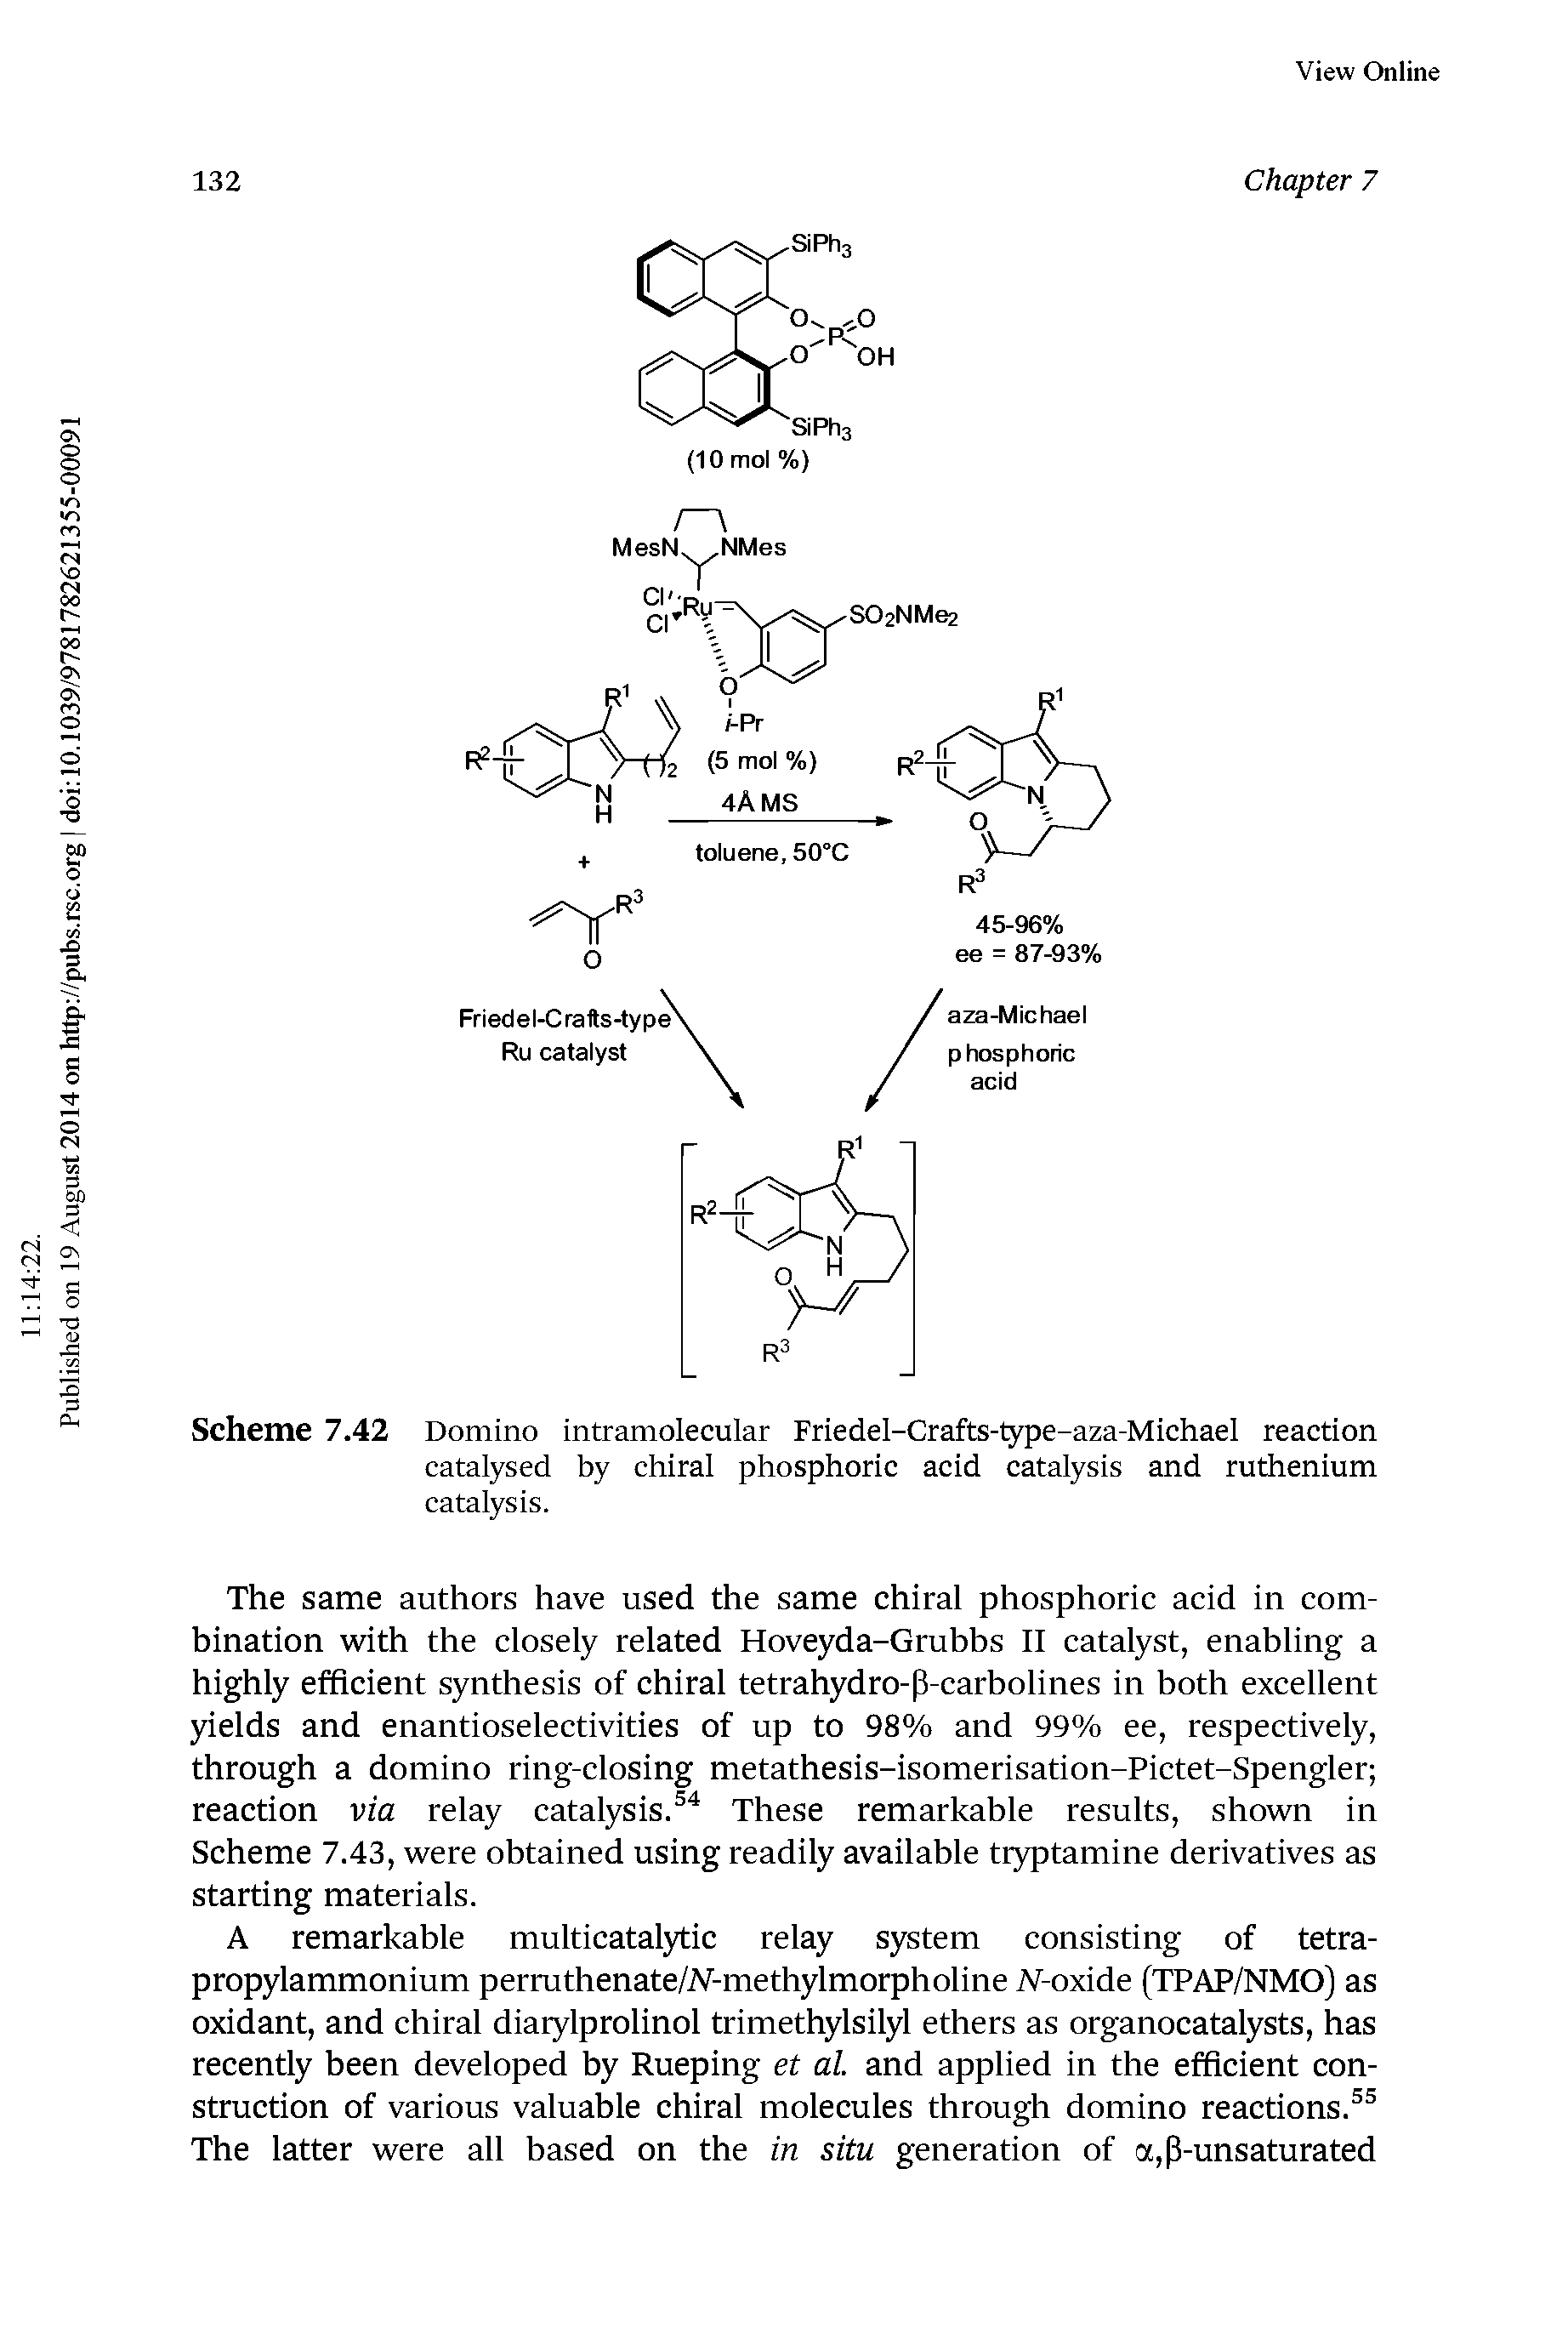 Scheme 7.42 Domino intramolecular Friedel-Crafts-type-aza-Michael reaction catalysed by chiral phosphoric acid catalysis and ruthenium catalysis.